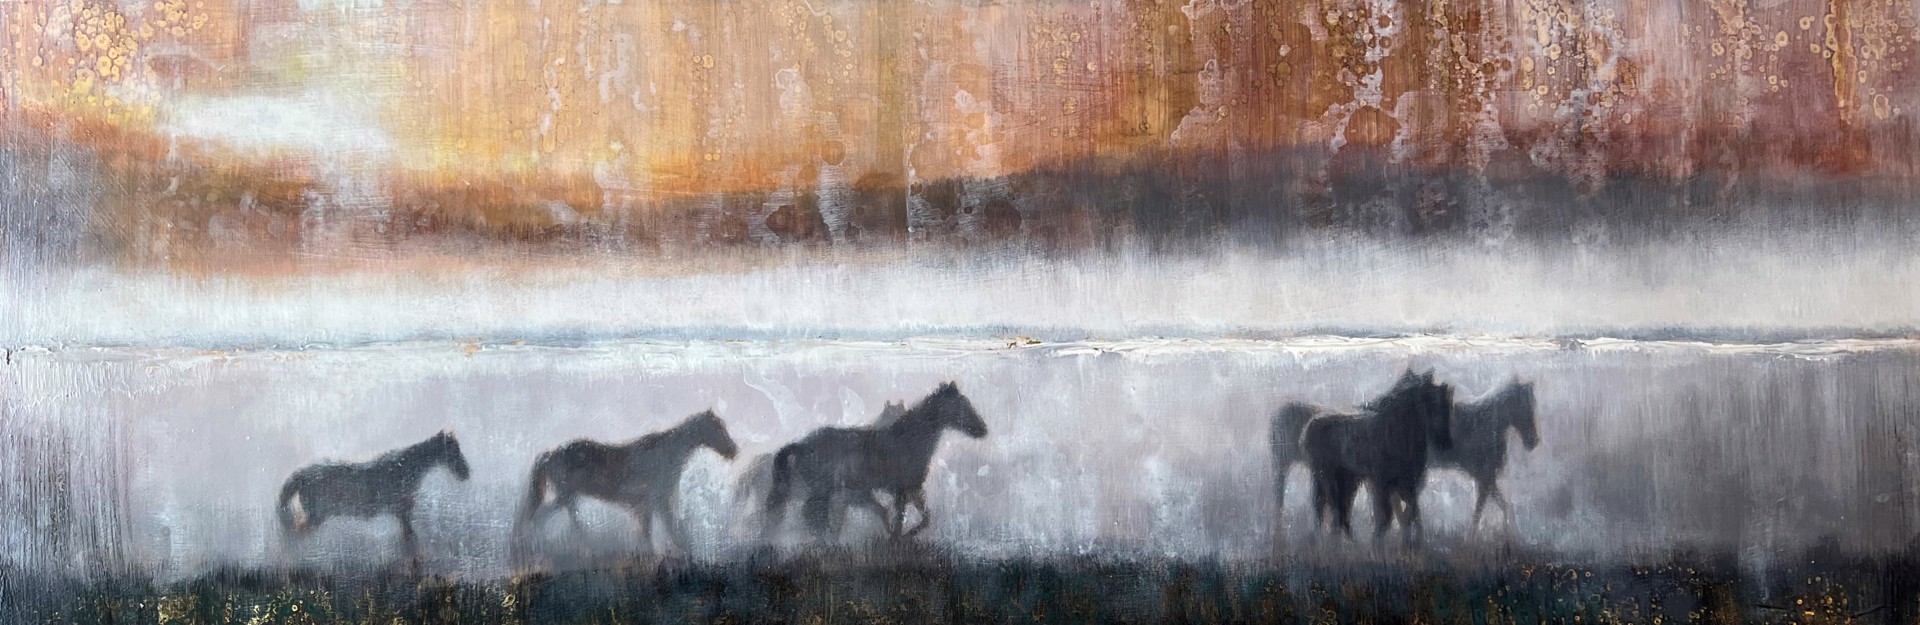 Original Mixed Media Painting By Nealy Riley Featuring A Horse Herd In Mist Over Abstract Background